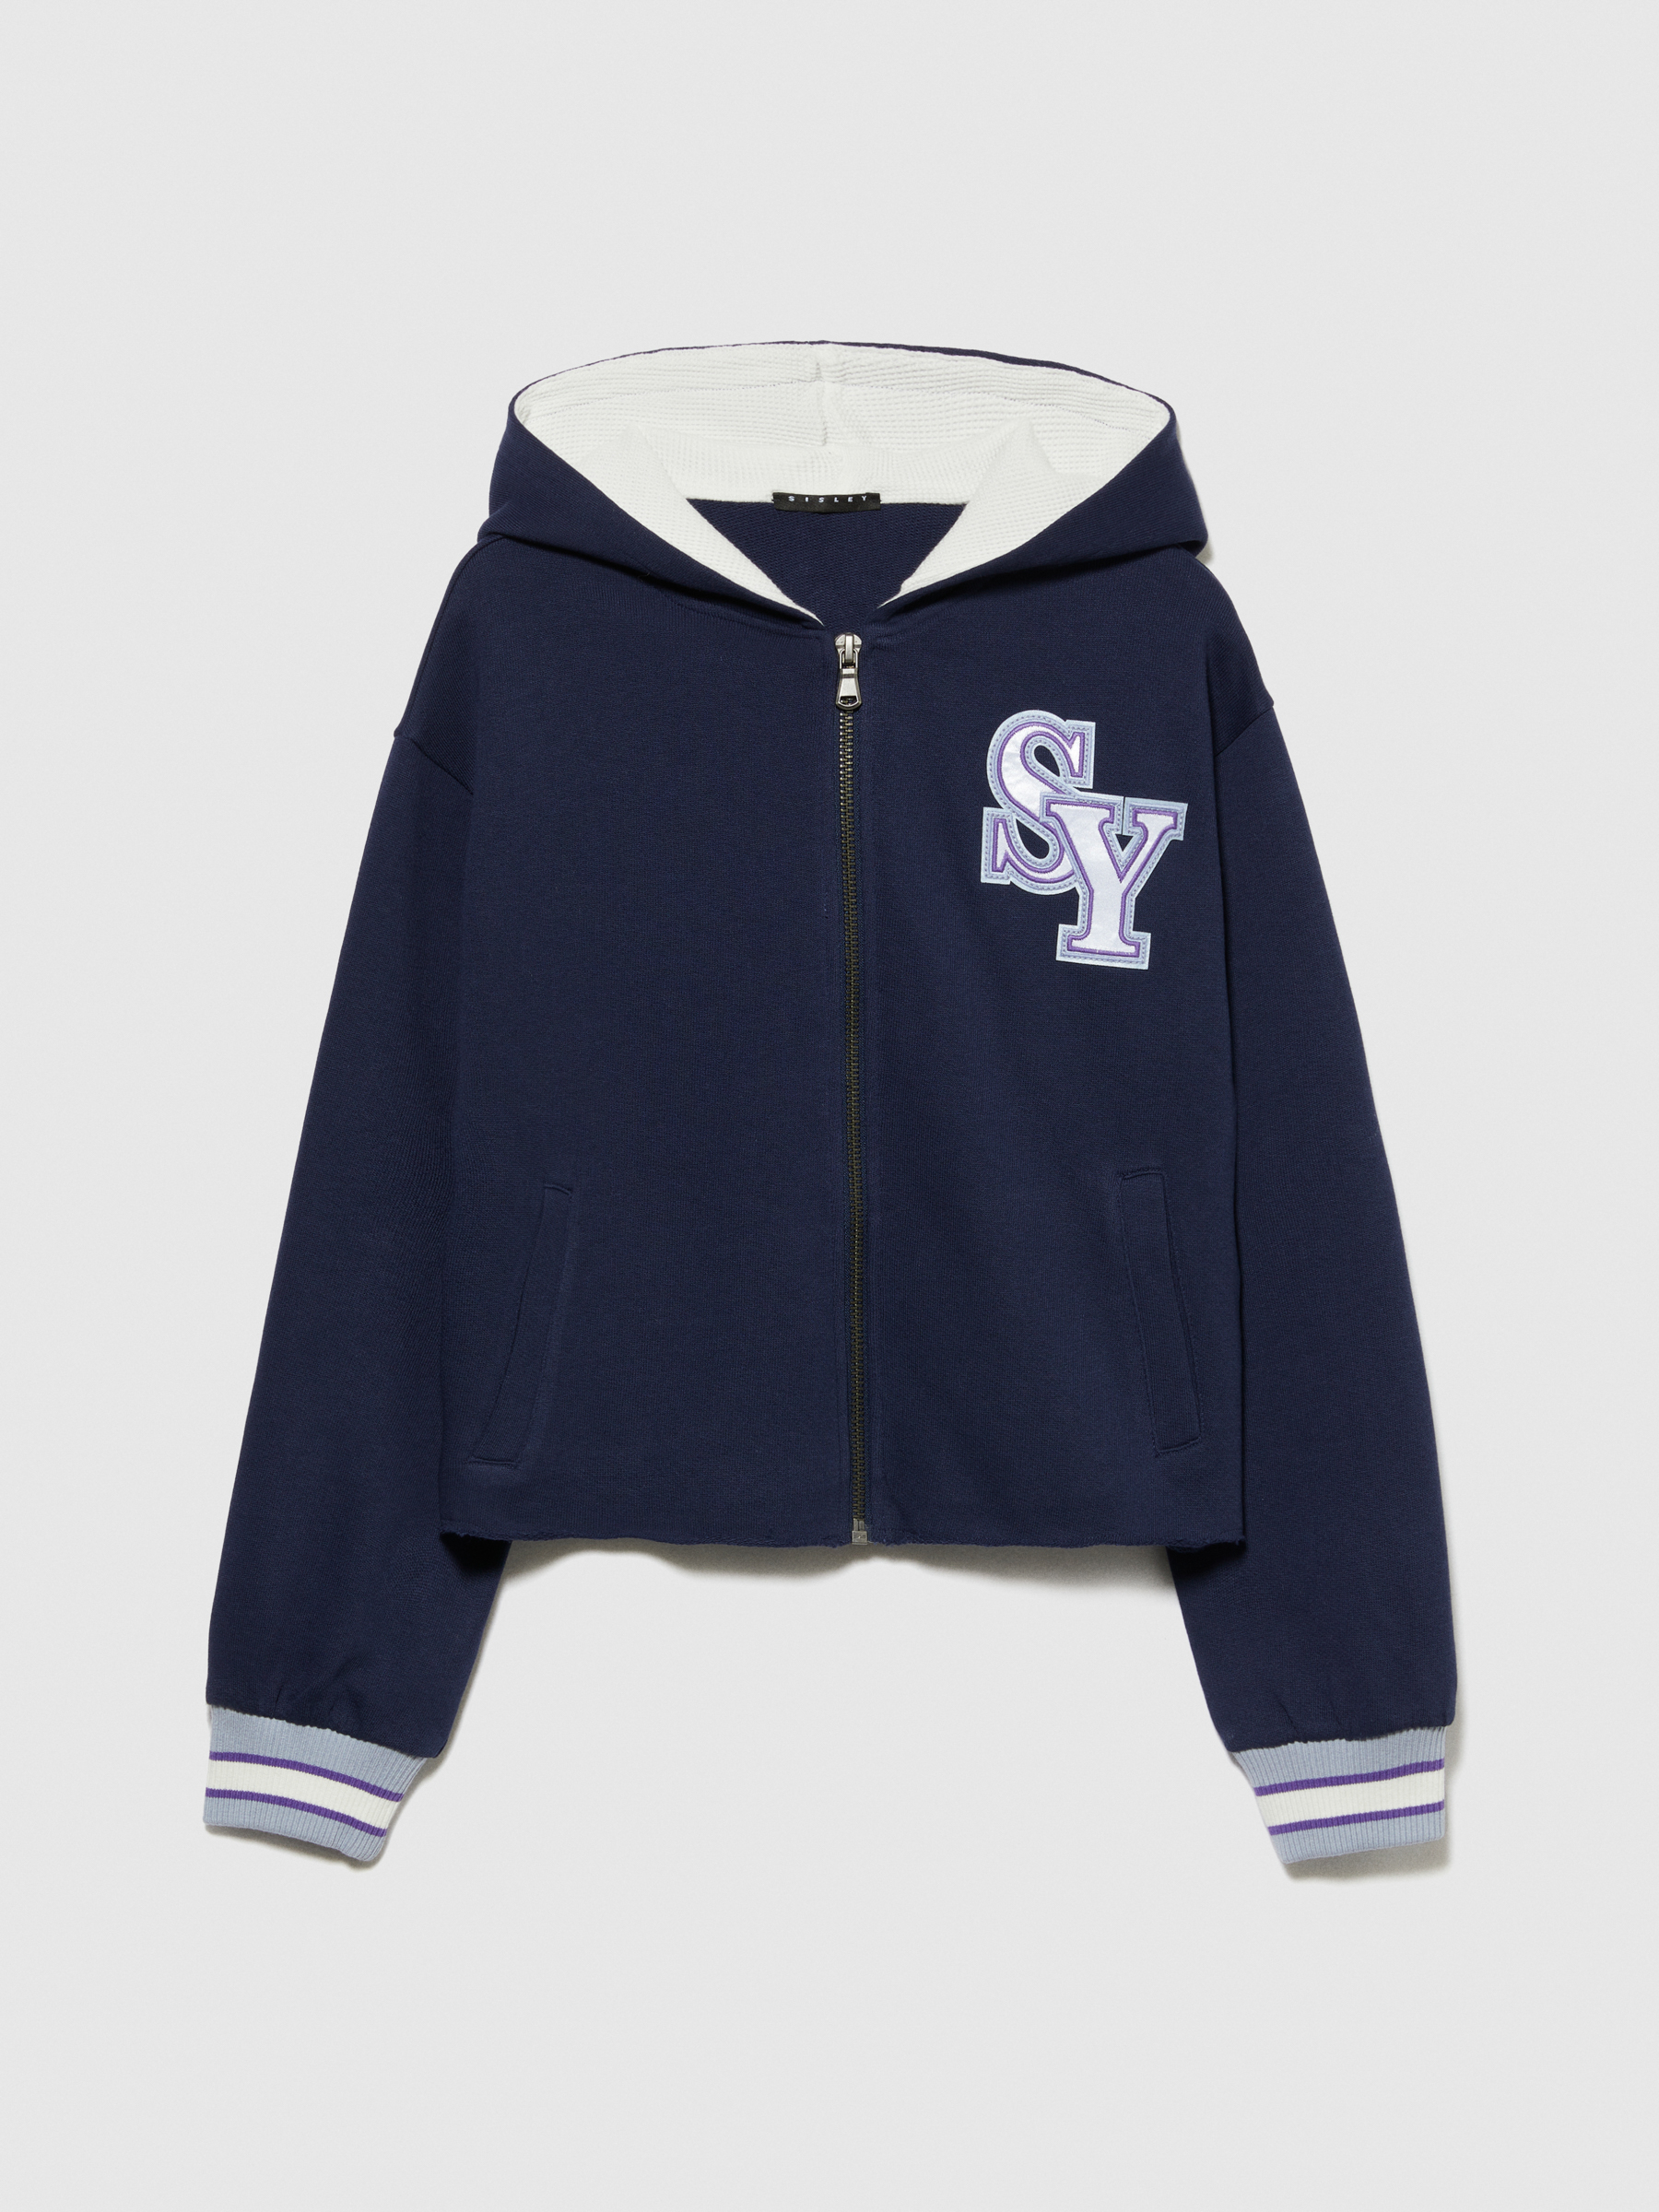 Sisley Young - Cropped Hoodie With Embroidery, Woman, Dark Blue, Size: L